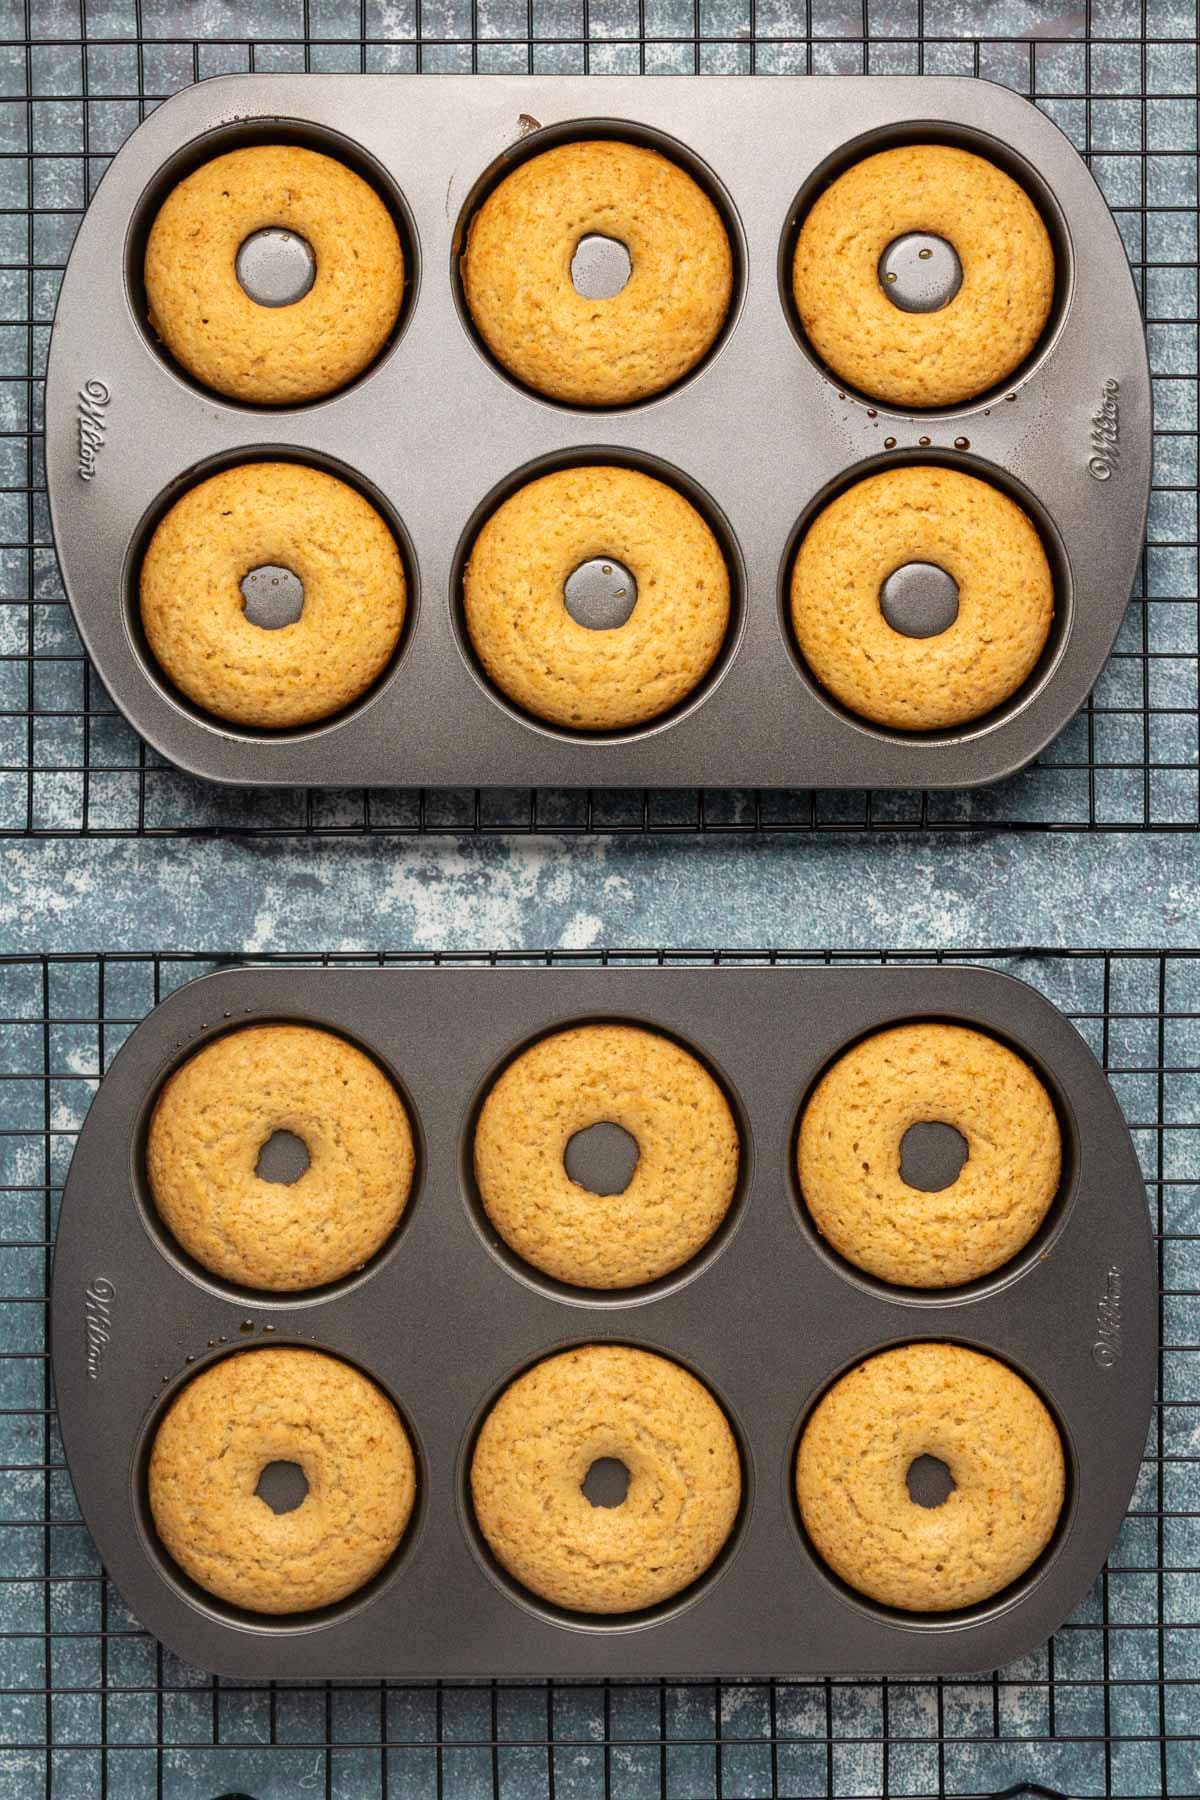 Freshly baked donuts in donut trays.